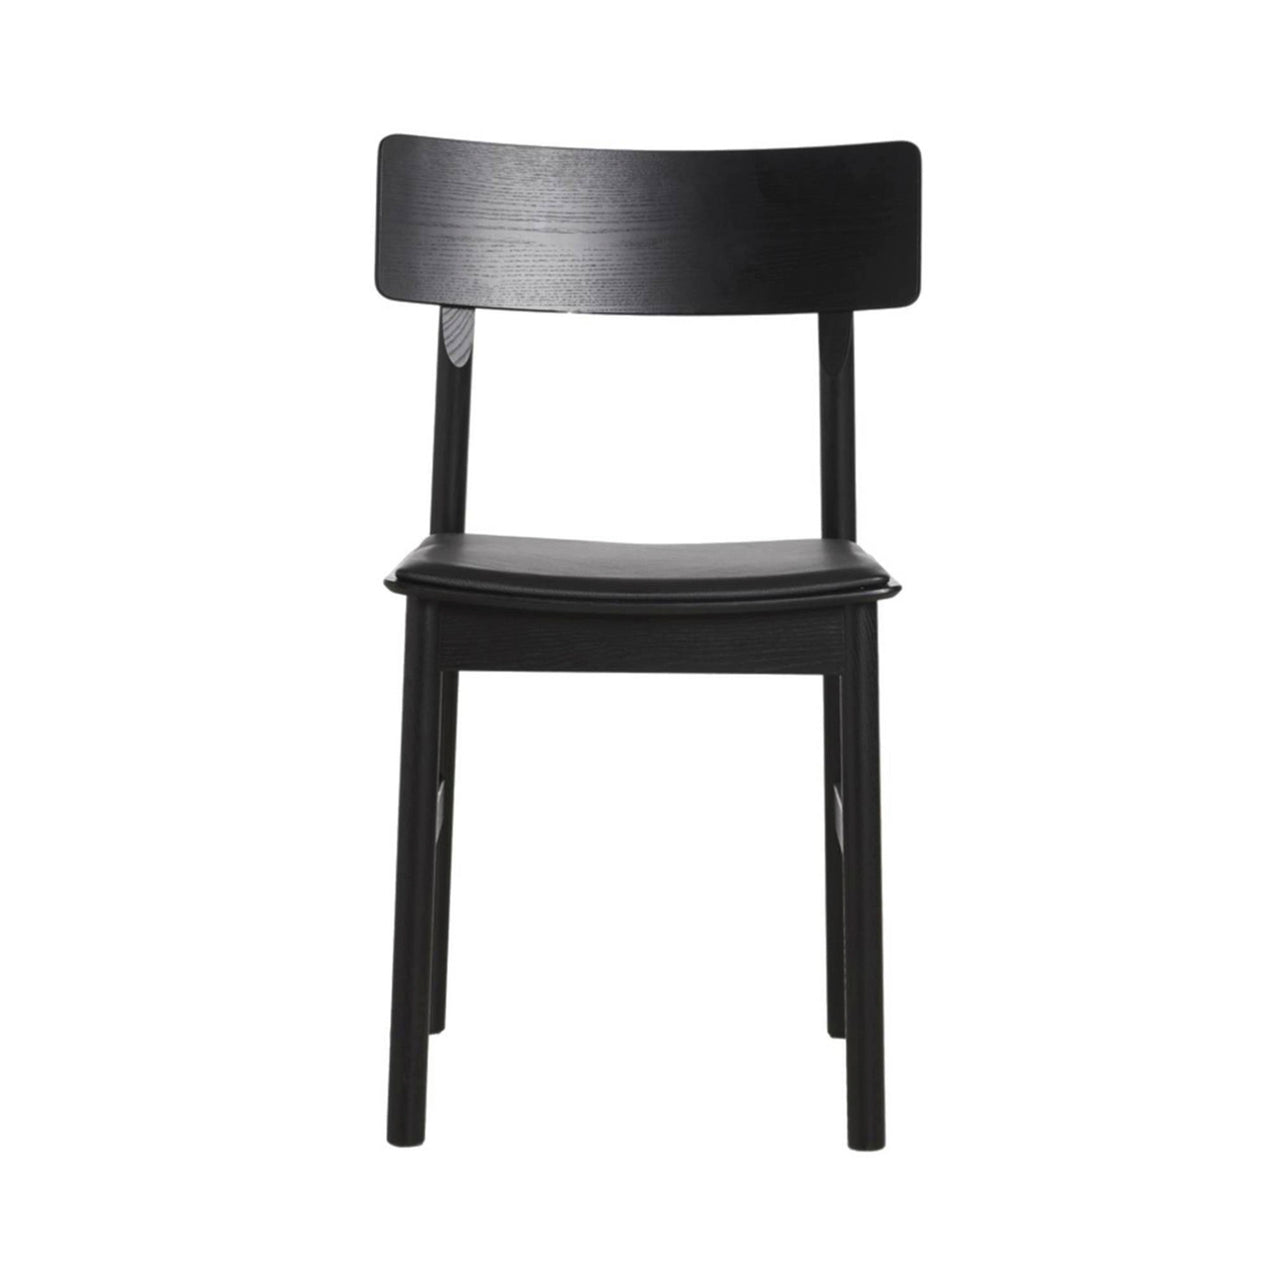 Pause Dining Chair 2.0: Set of 2 + Black Painted Ash + With Black Seatpad